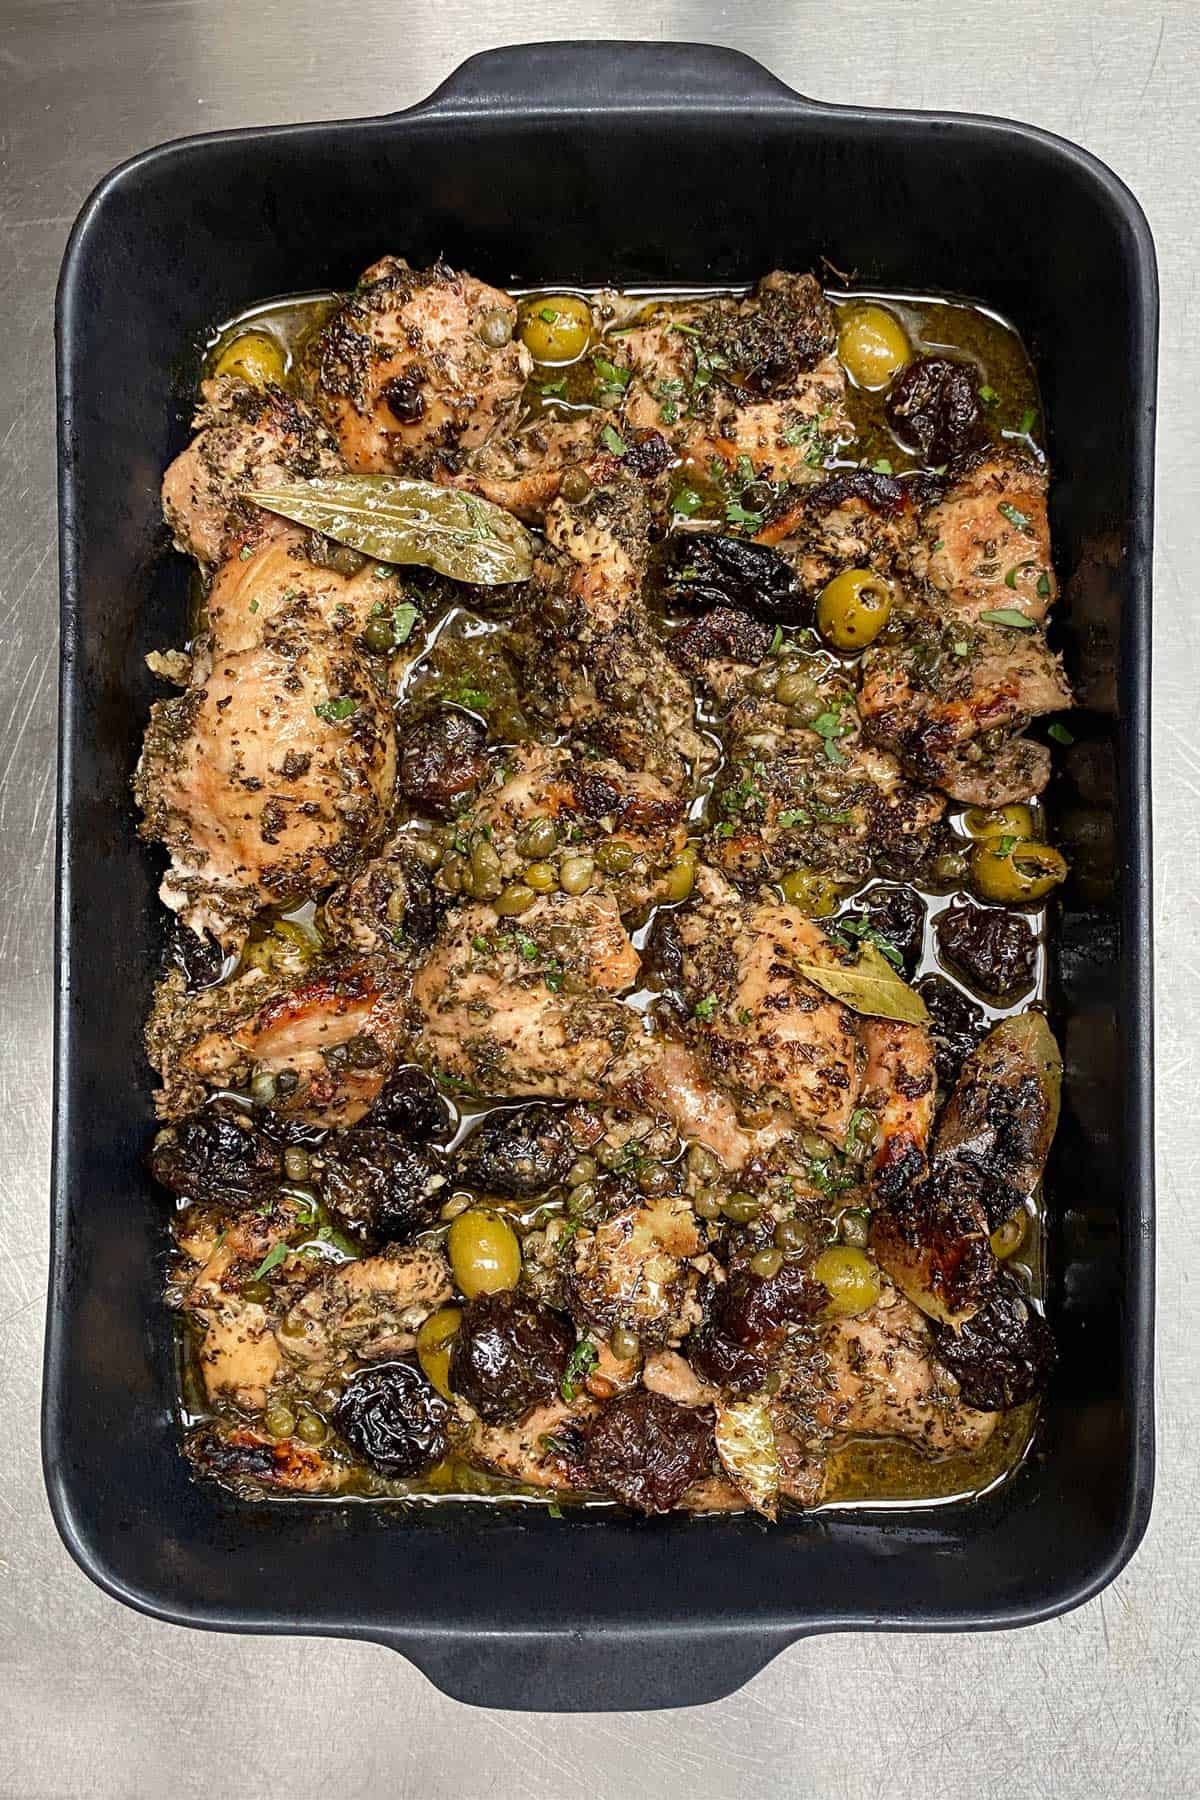 Rectangular black roasting pan filled with boneless chicken marbella, prunes, green olives and a bay leaf